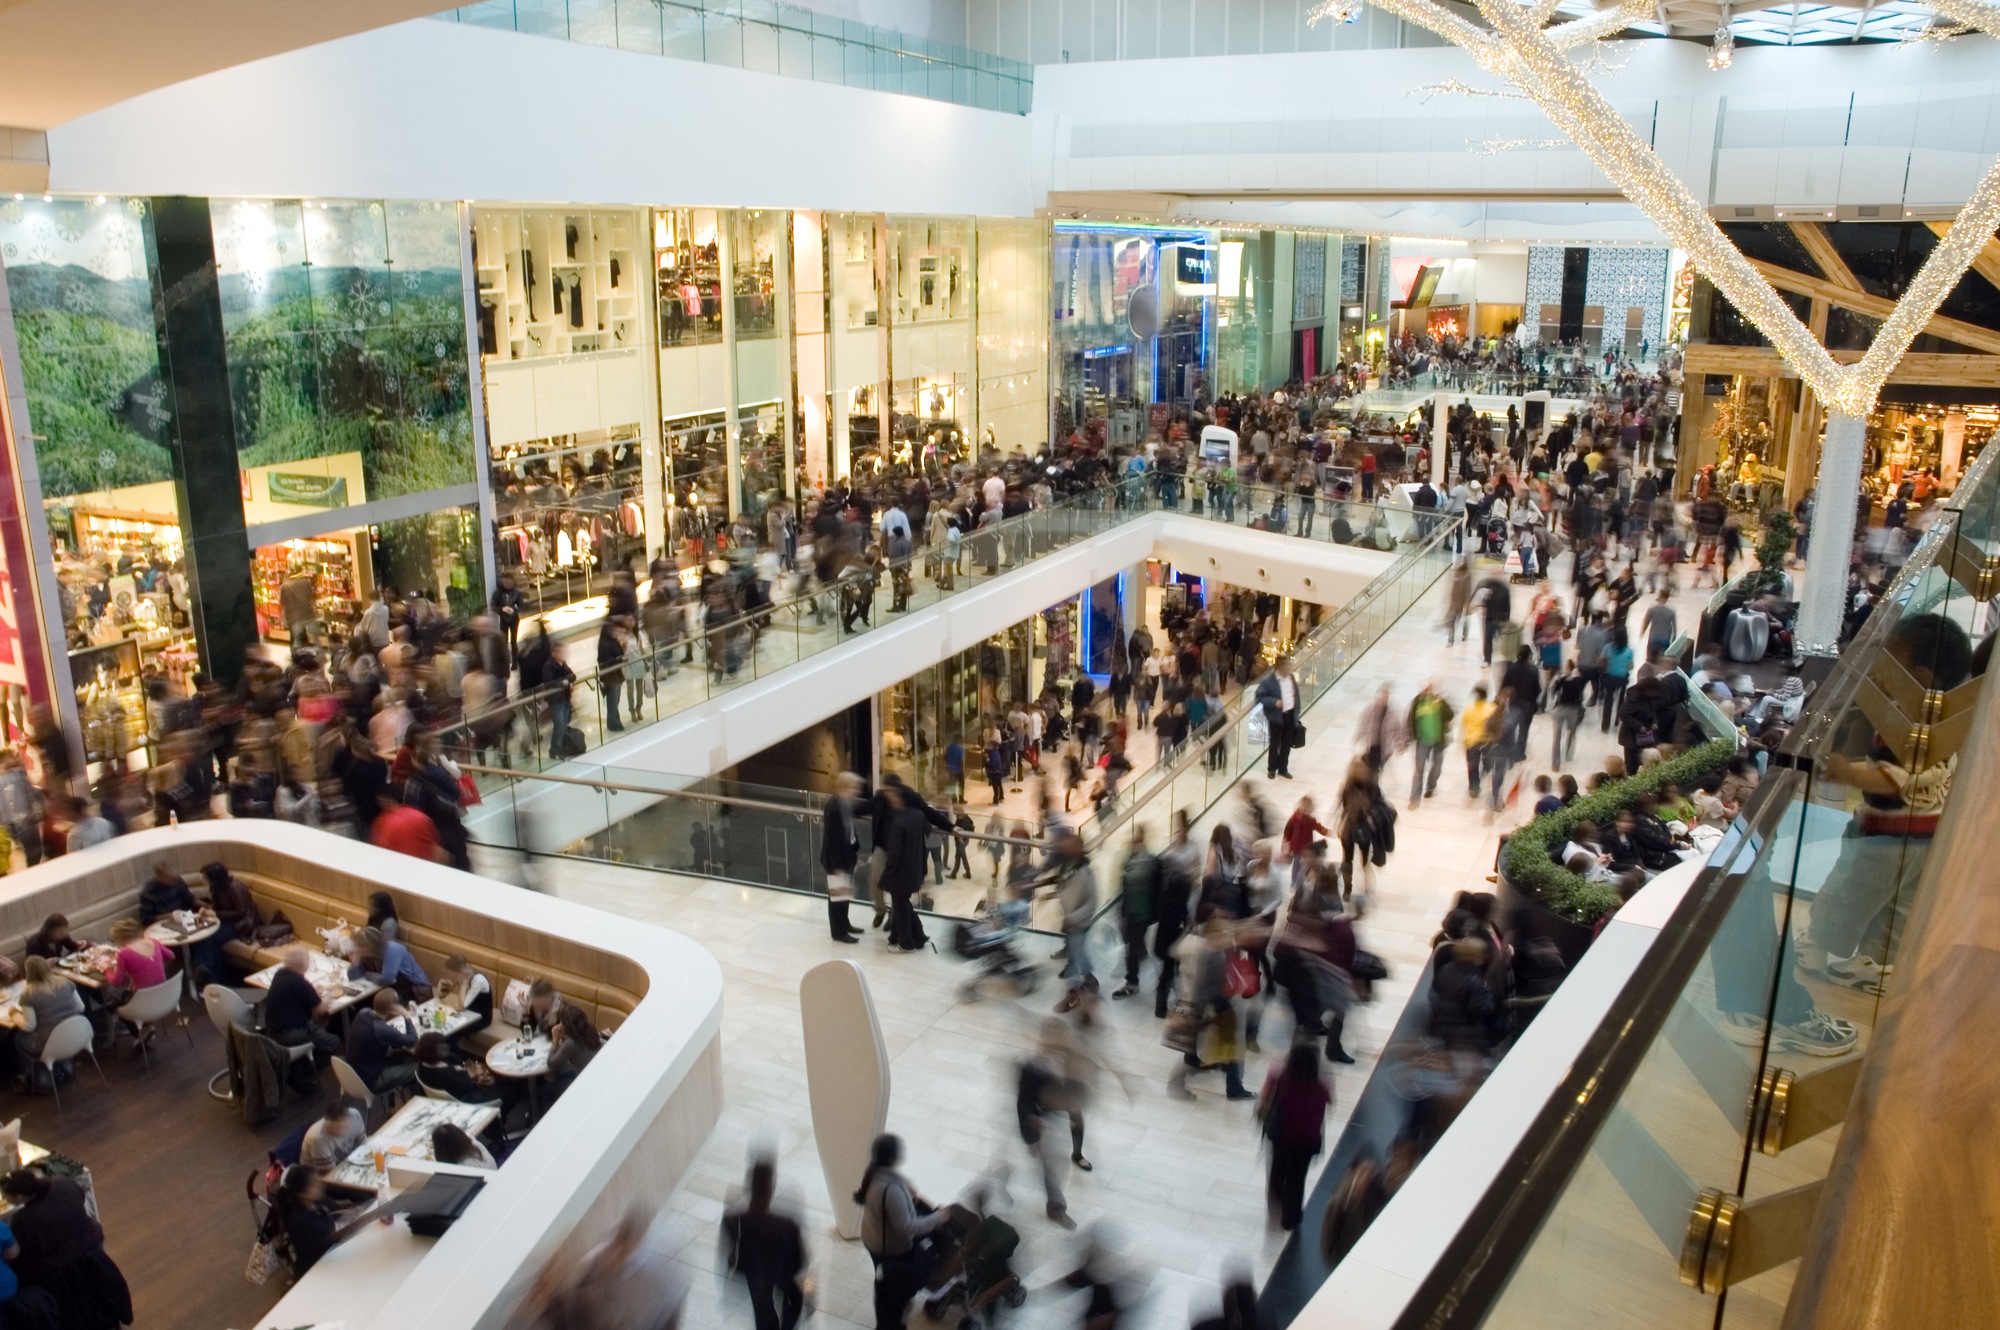 6 Best Shopping Malls in Illinois State of USA, Top Malls